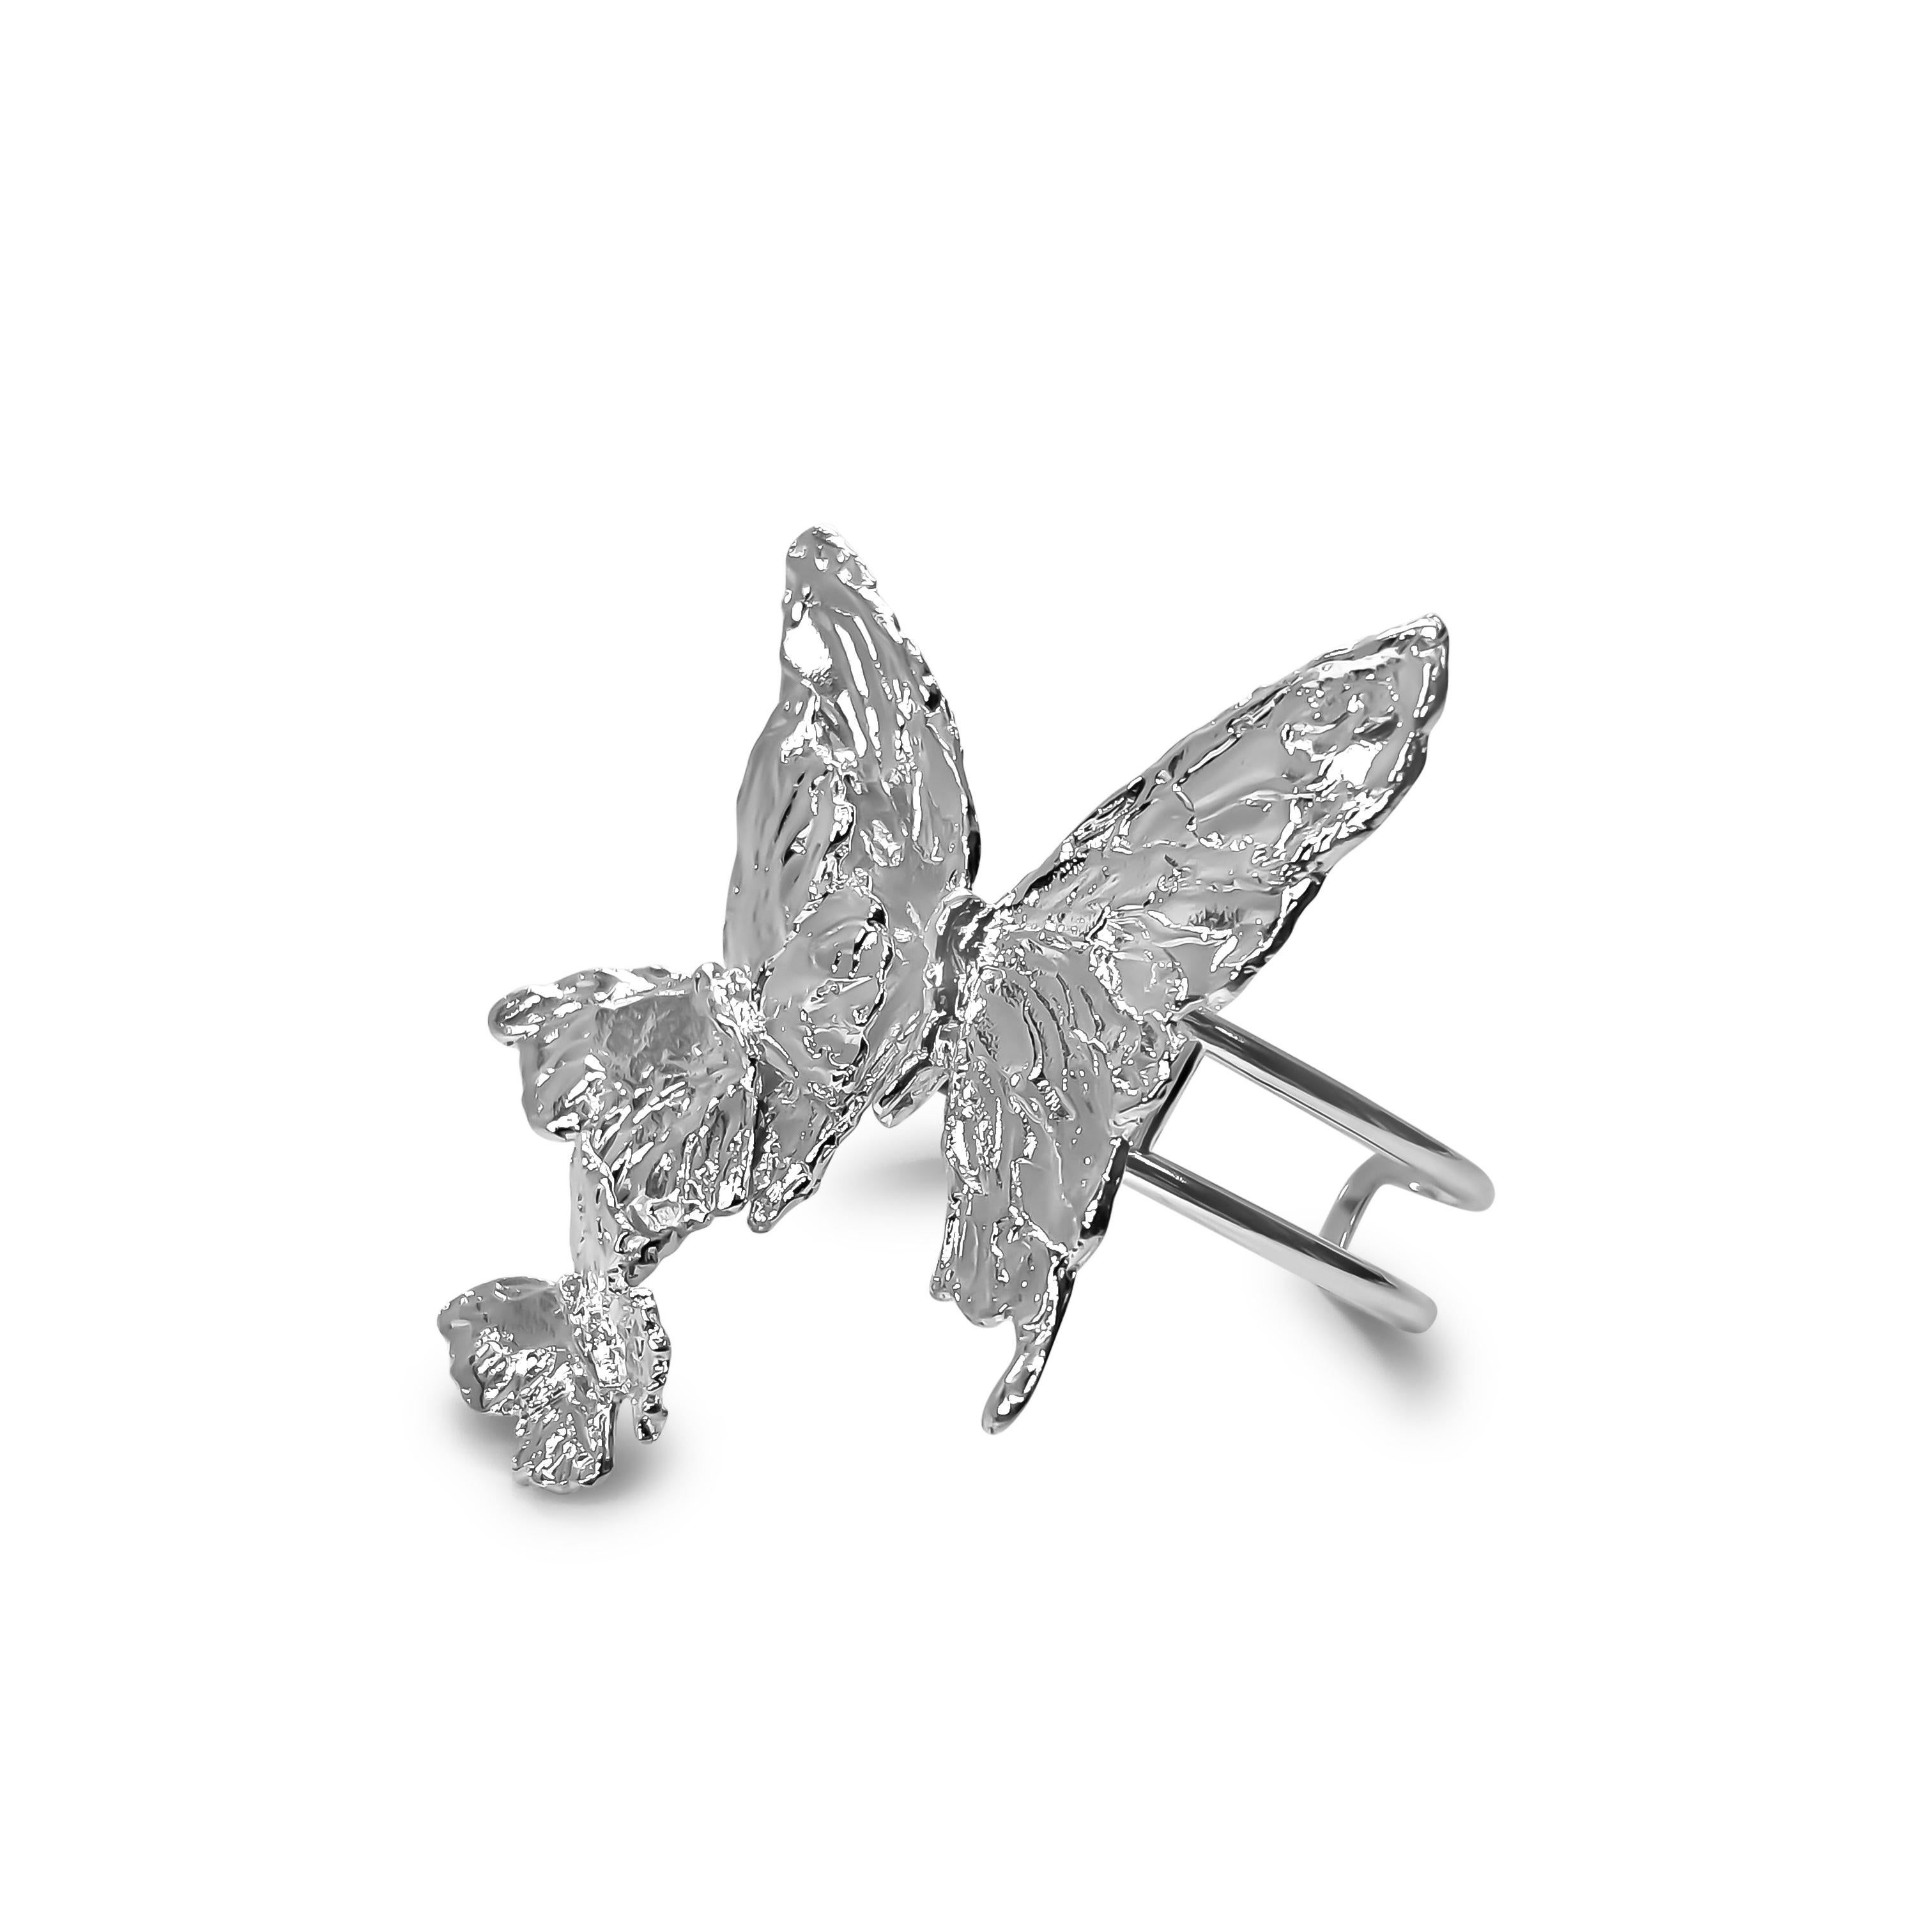 Intention: Adorn Yourself 

Design: Three ornamental butterflies meet to make the perfect path over the wrist

Style Suggestions: What's better than having a right hand man at your side? These three will keep you company and bring out your natural